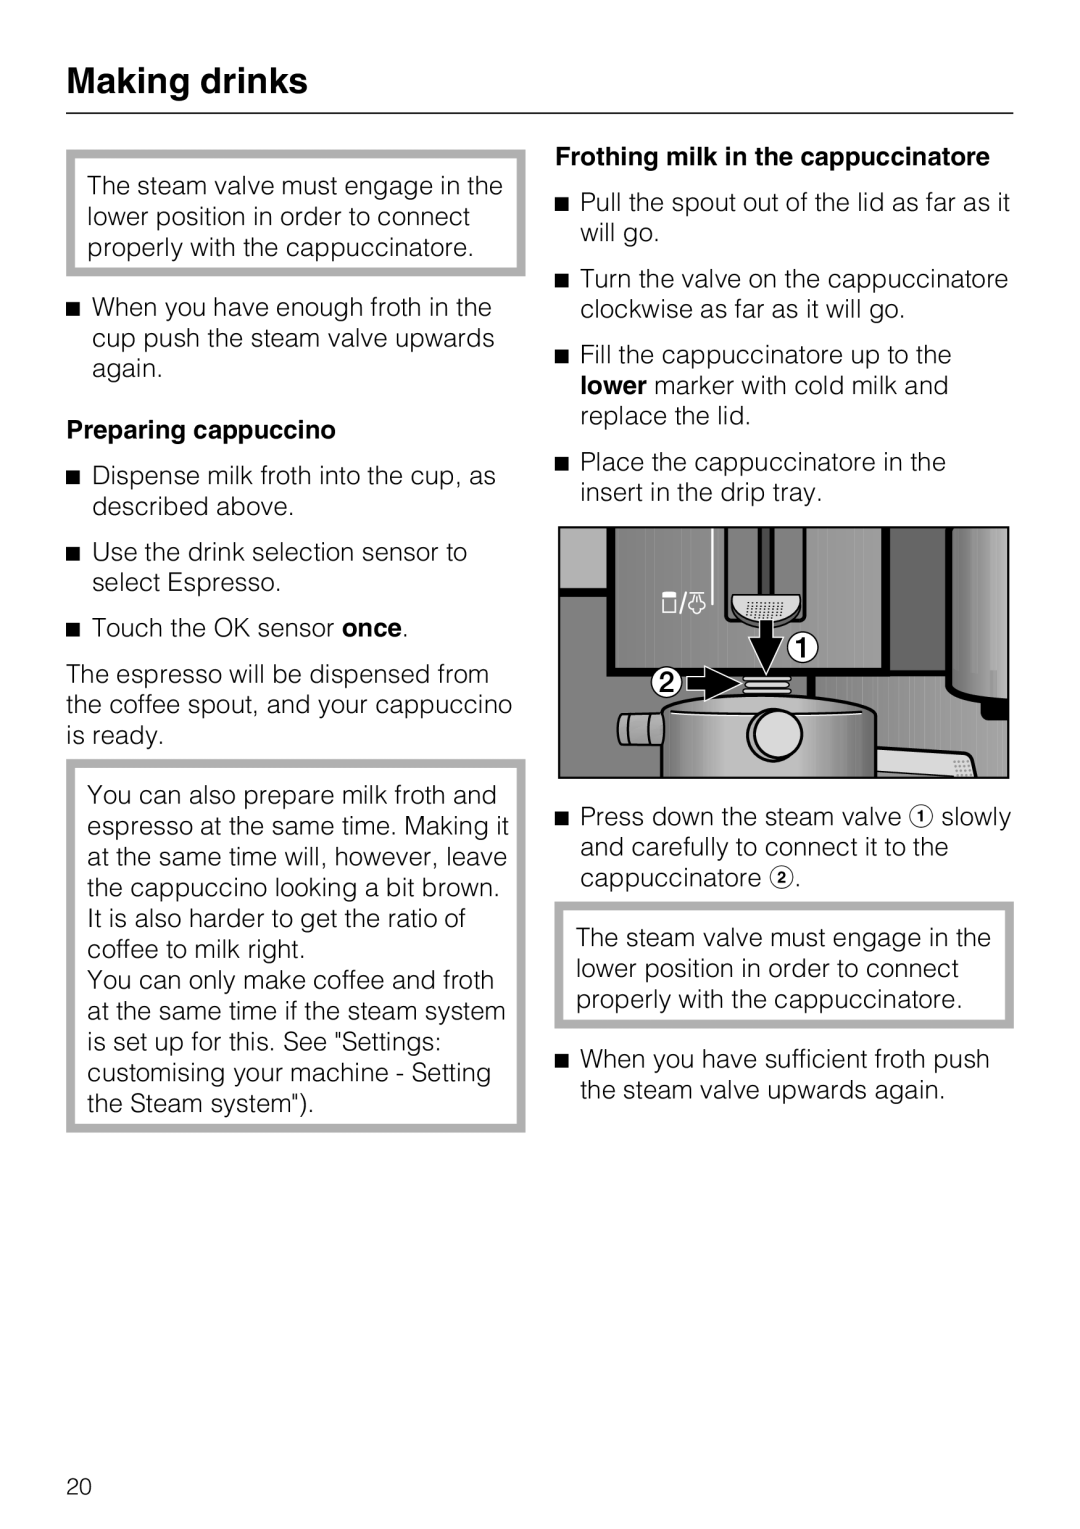 Miele CVA 3650 installation instructions Preparing cappuccino, Frothing milk in the cappuccinatore, Making drinks 